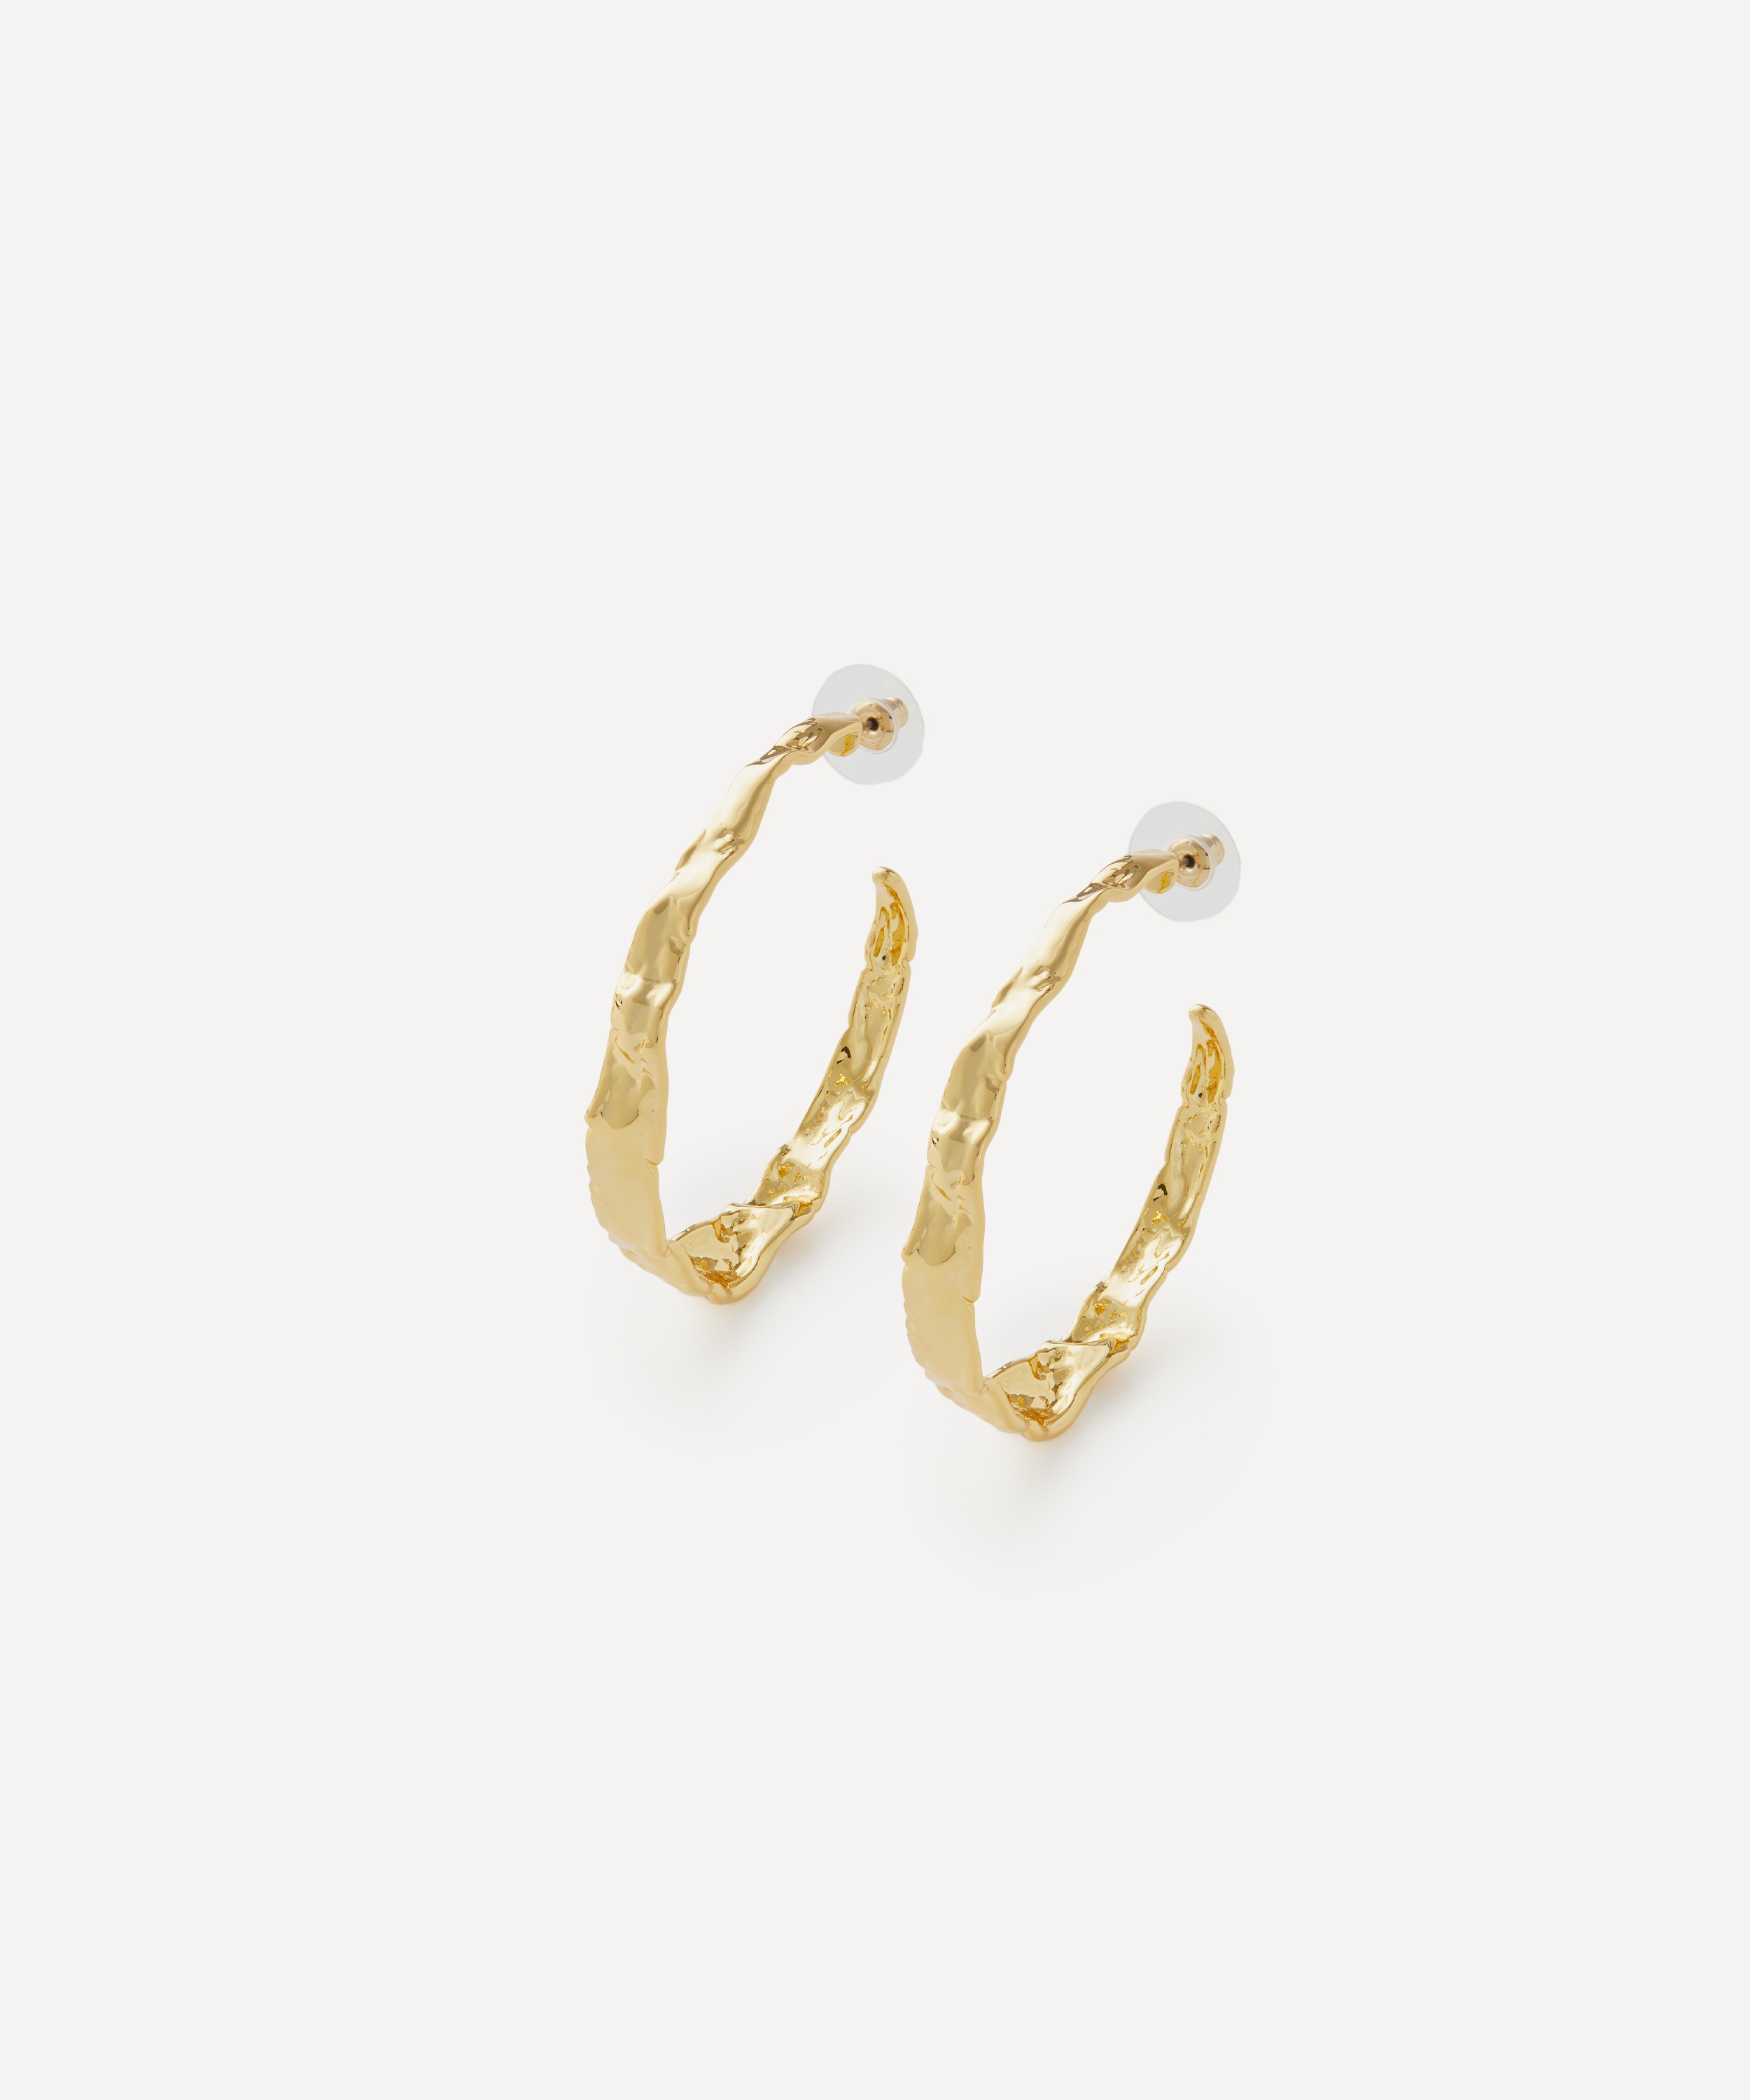 Alexis Bittar - 14ct Gold-Plated Brut Textured Hoop Earrings image number 0